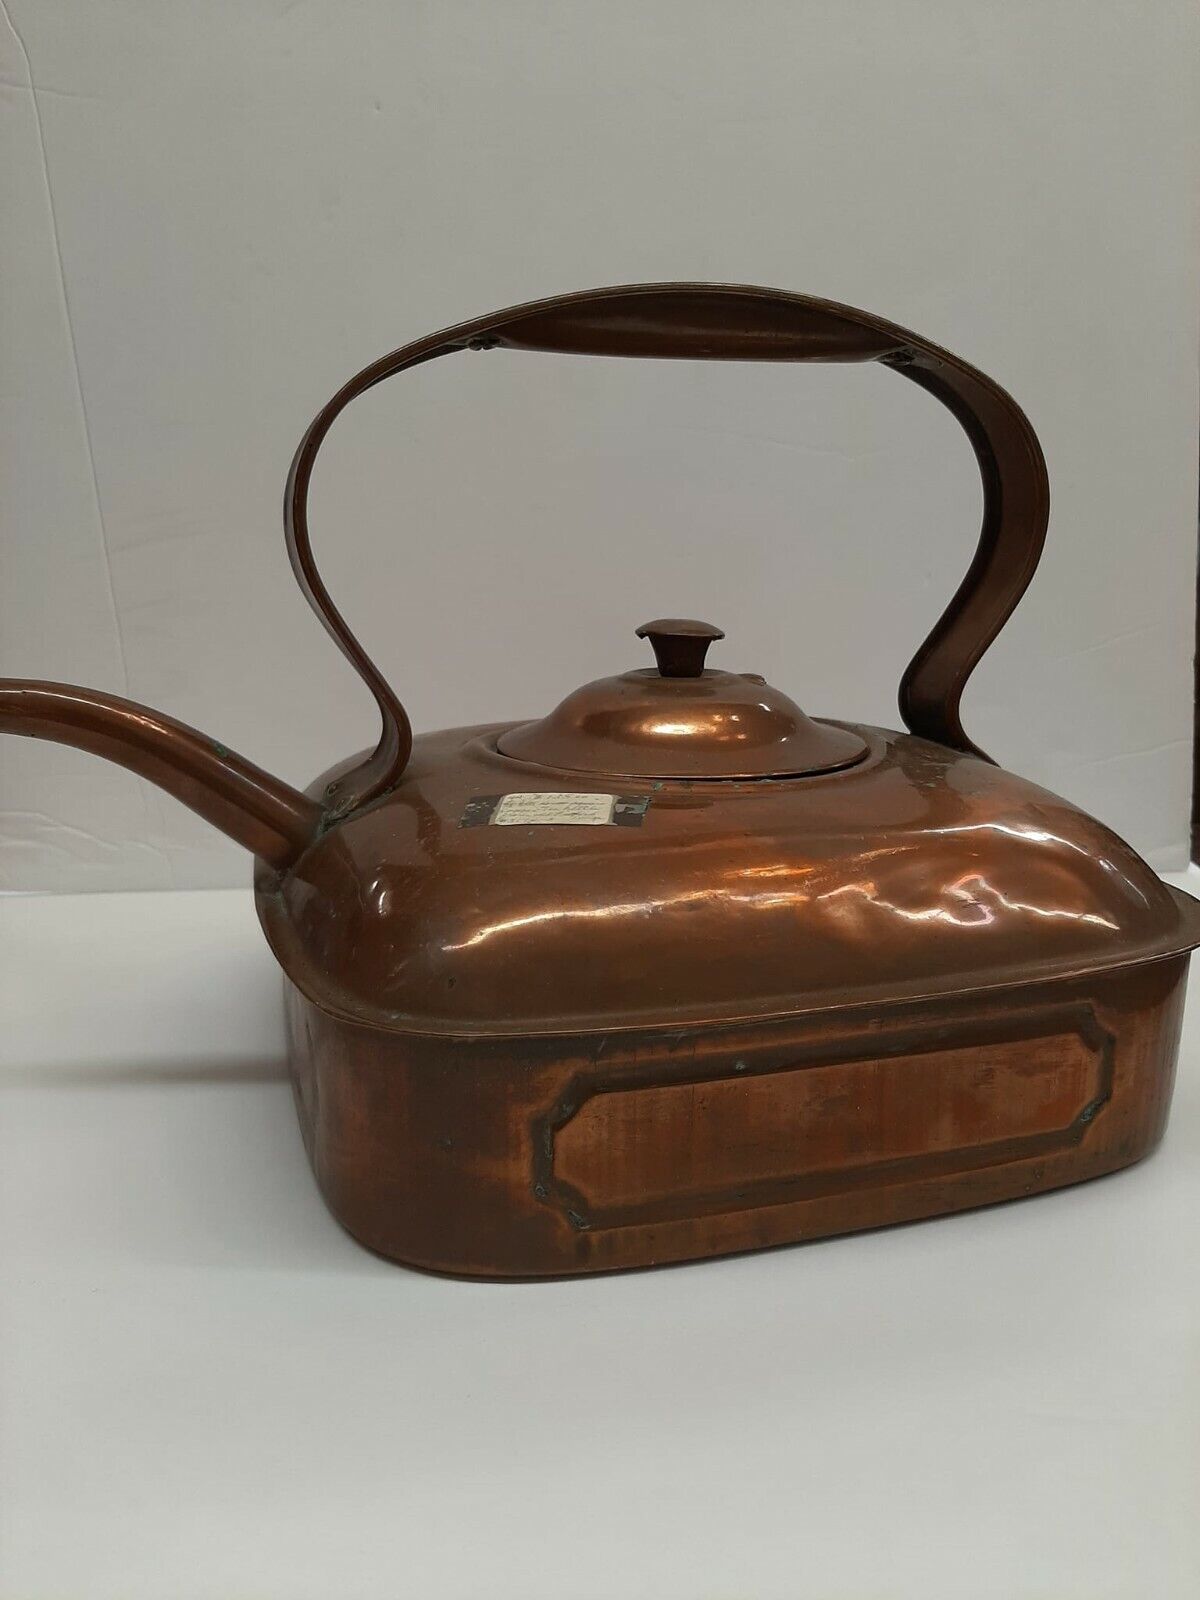 Vintage low profile 19th Century Square Copper Tea Kettle from an English barge.